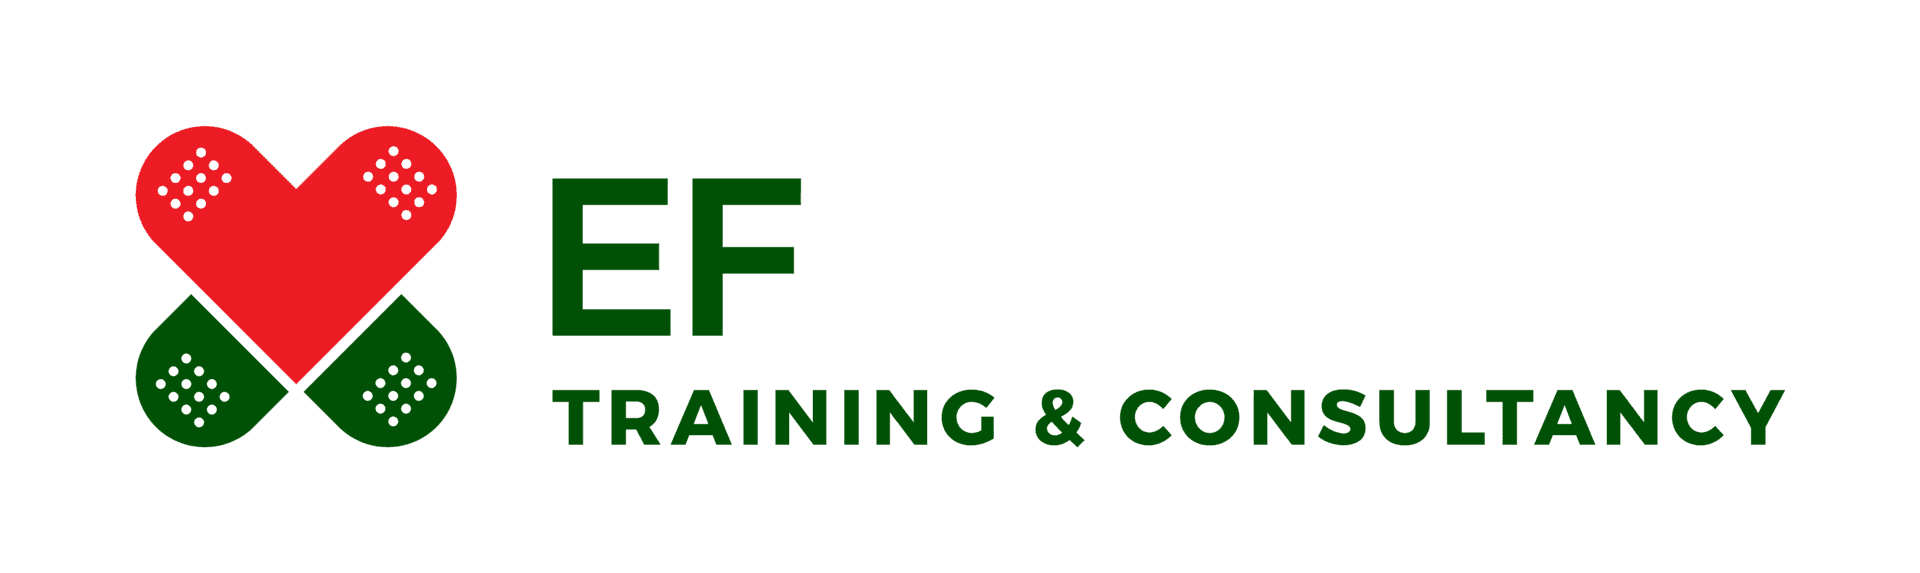 ef training and consultancy